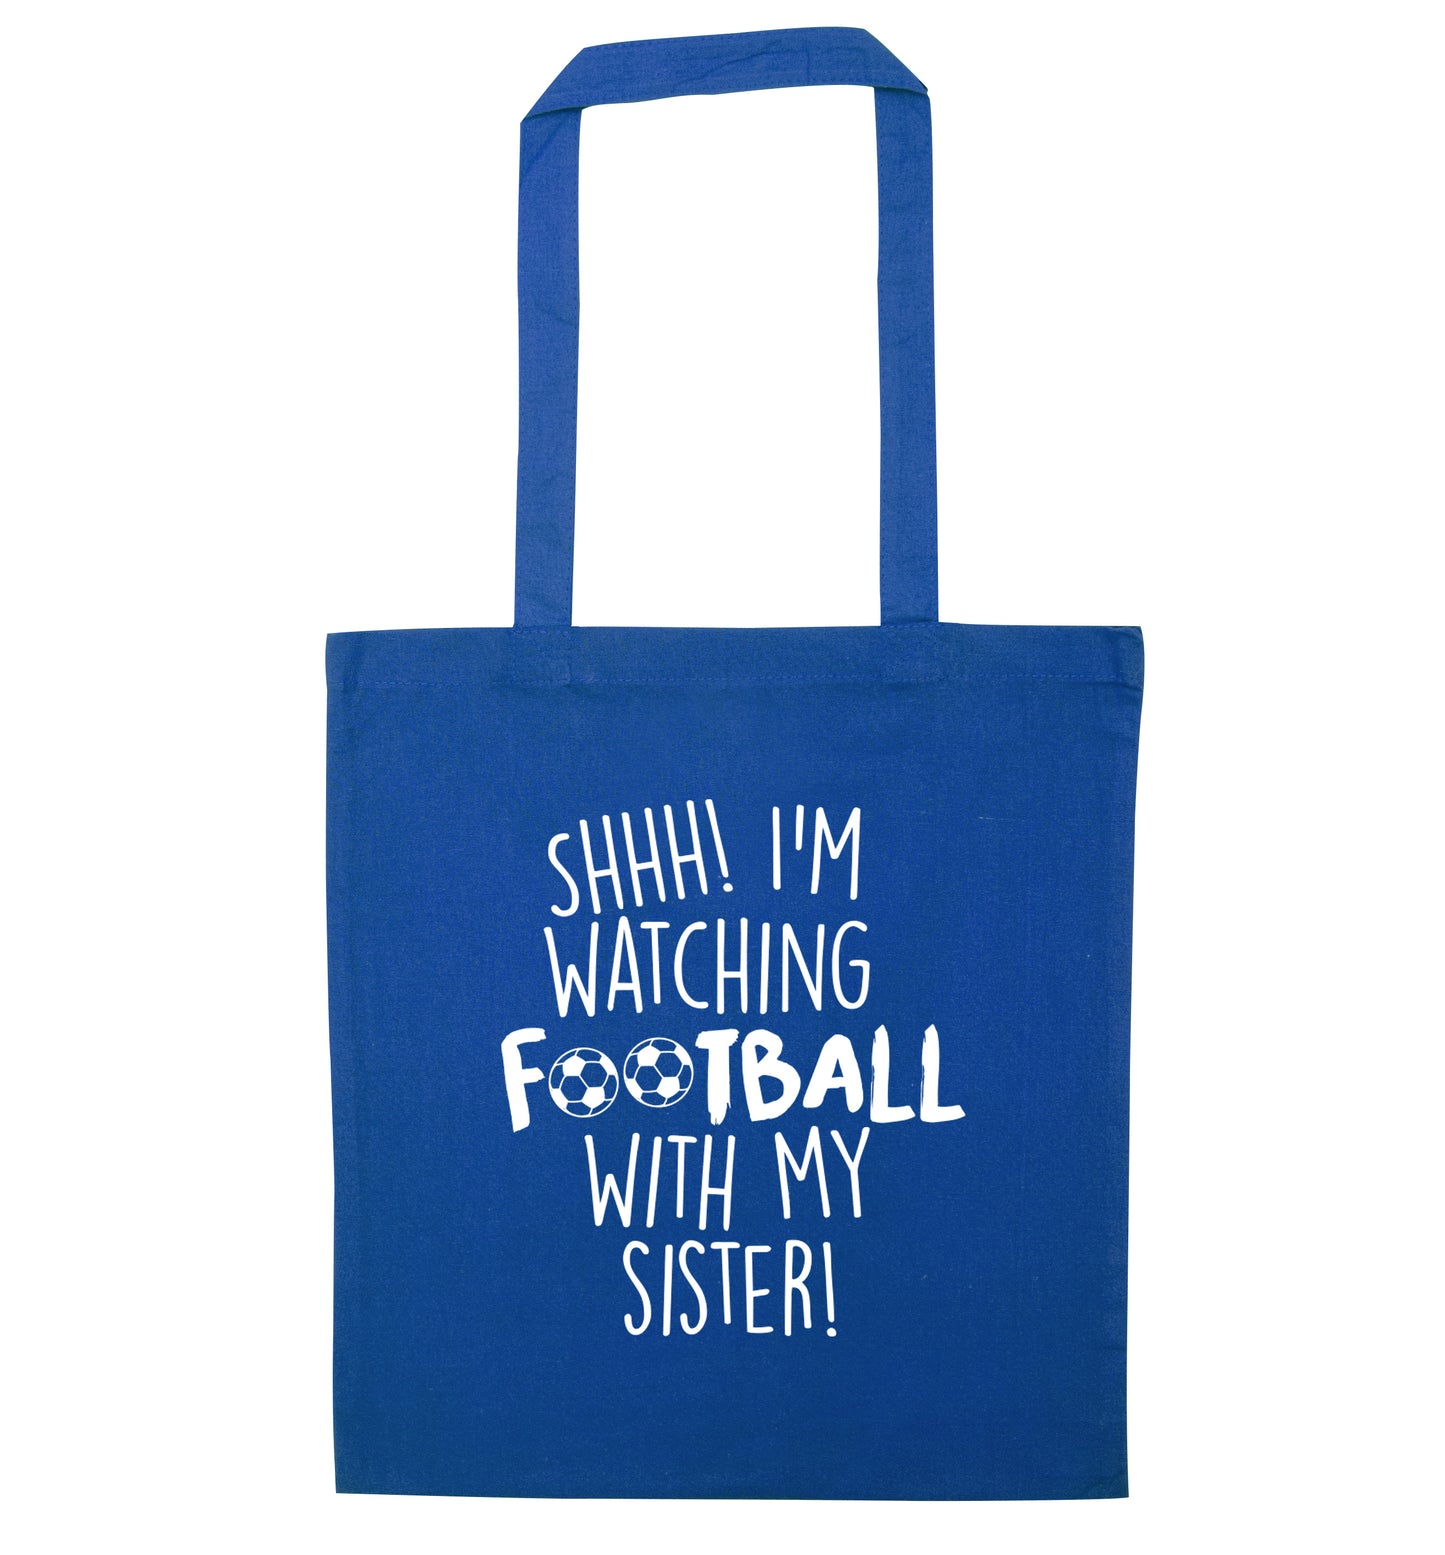 Shhh I'm watching football with my sister blue tote bag